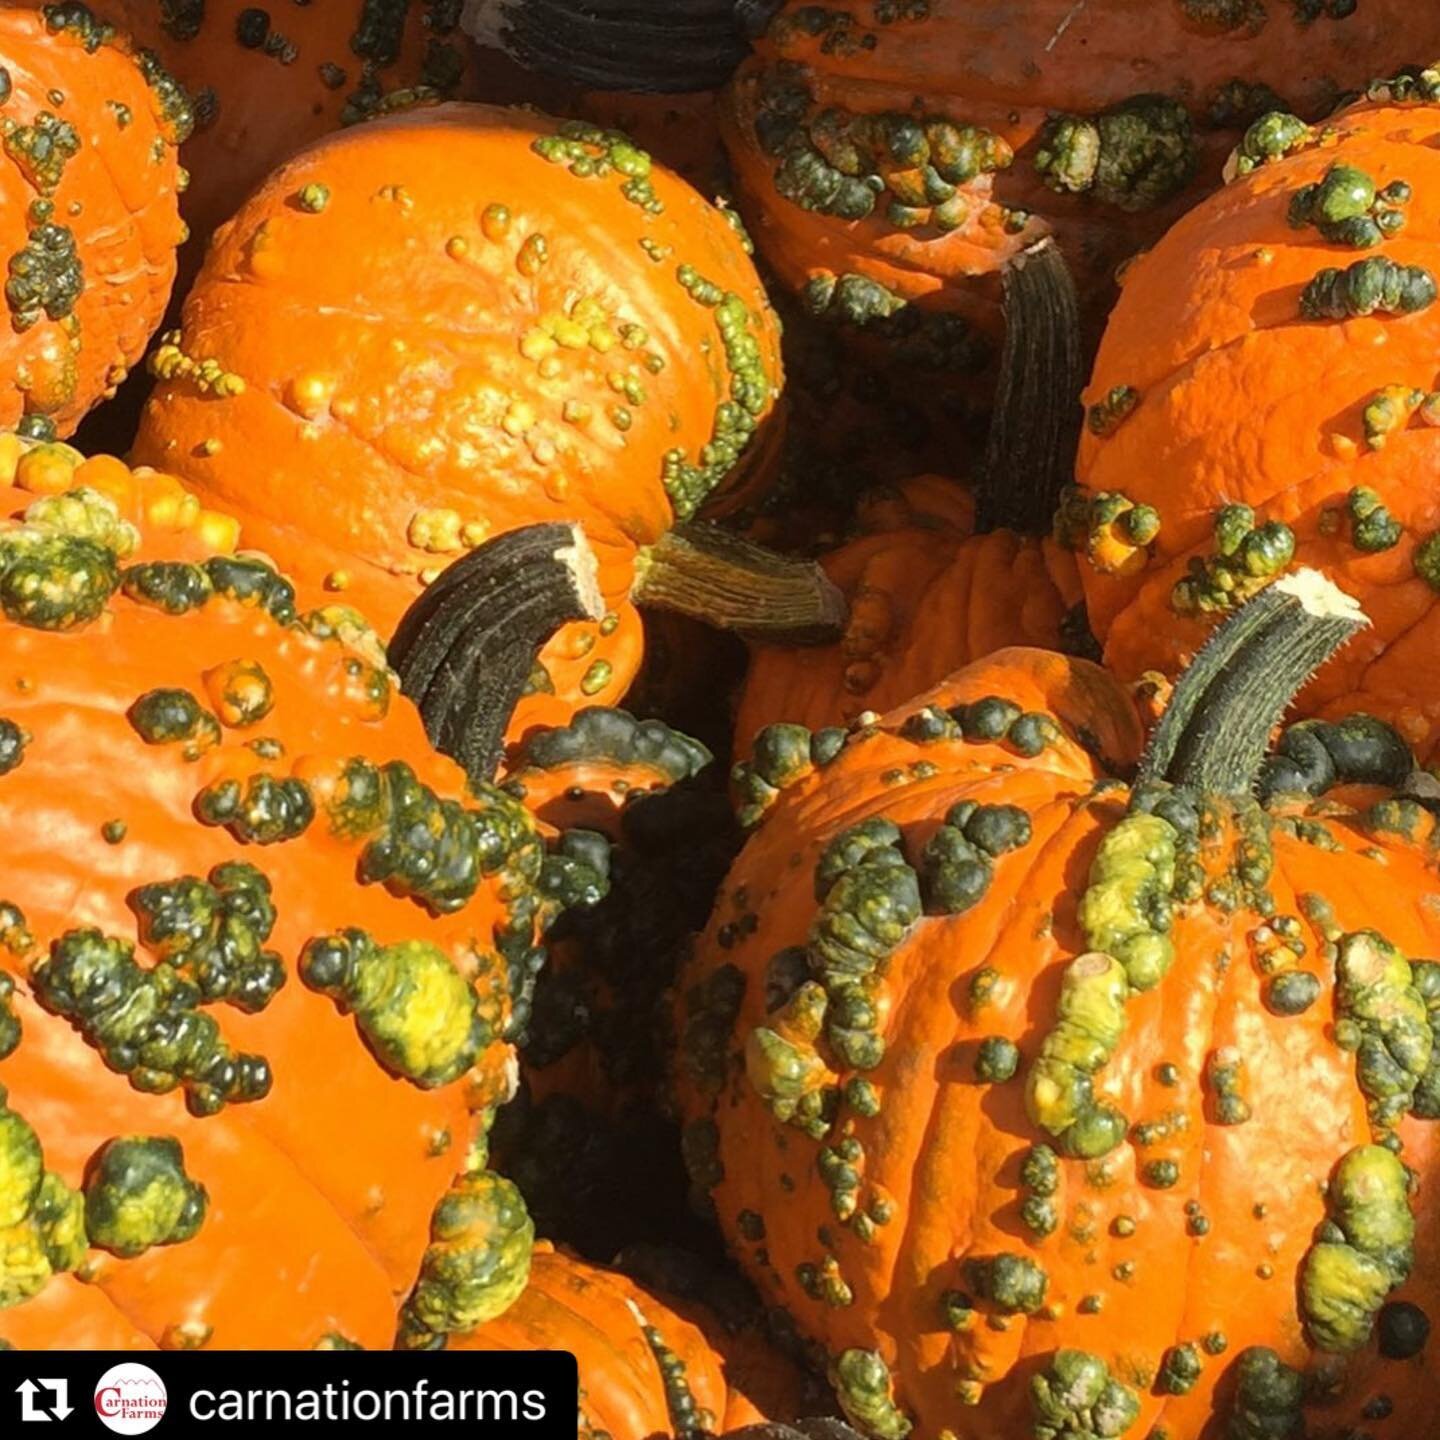 #Repost @carnationfarms with @make_repost ・・・Come see us Saturday 10am to 4pm @carnationfarms 
Weekend #2 of the Harvest Festival opens on Saturday, October 12 at 10 am. Yes, we have pumpkins galore!  And debuting this Saturday:  Axe-throwing courtes